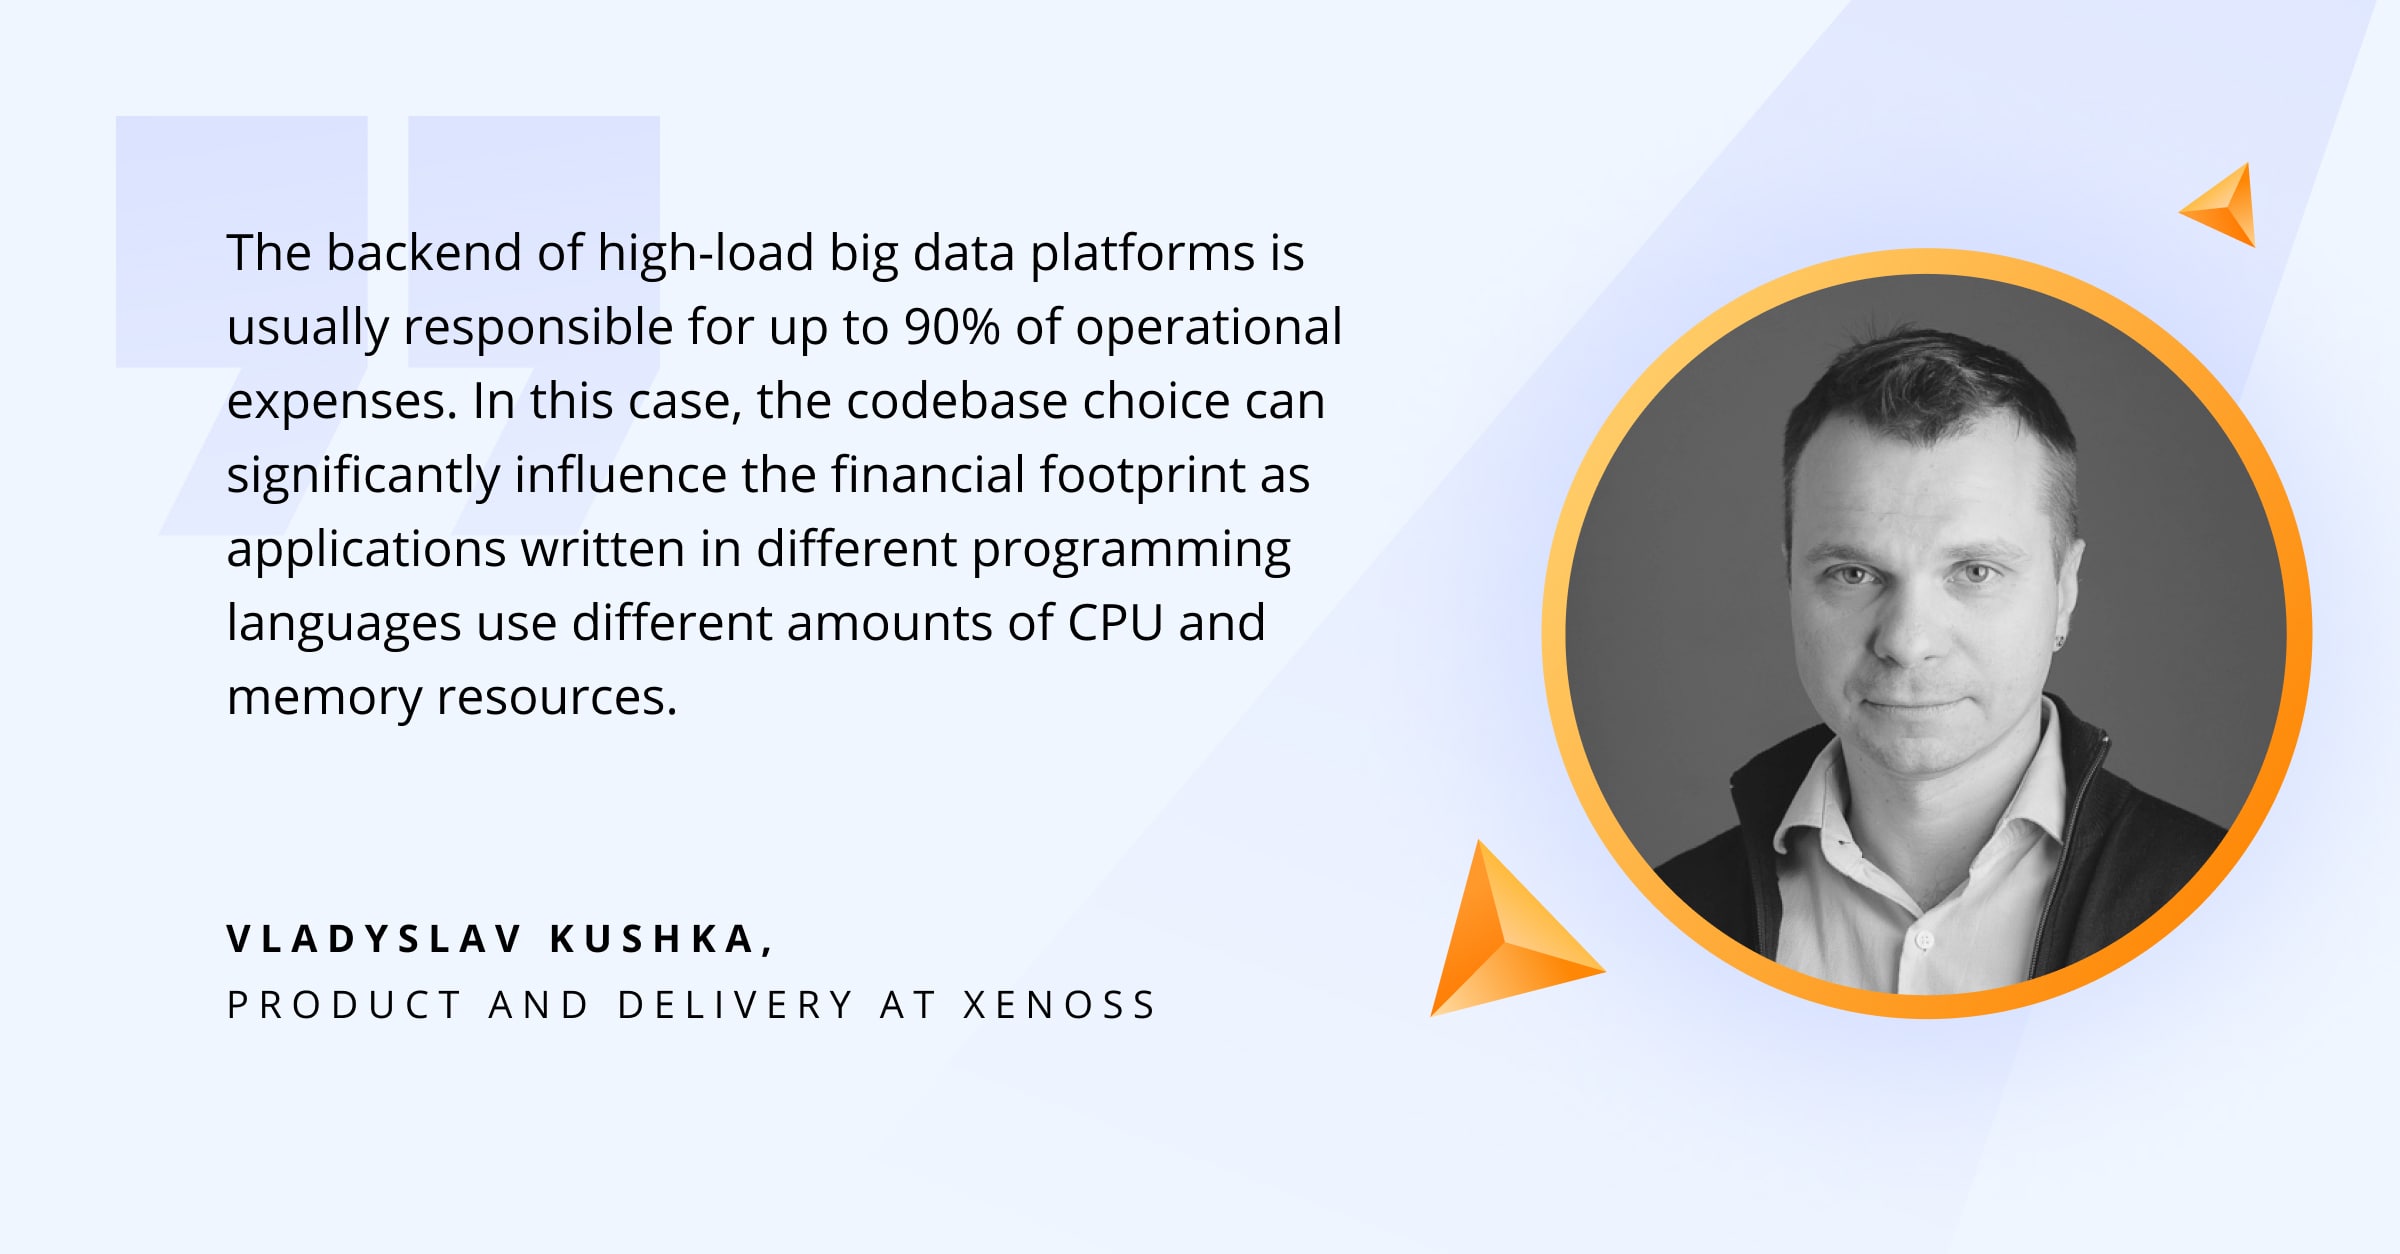 Comment of Vladyslav Kushka on the influence of a codebase choice on operational costs of high-load applications | Xenoss Blog